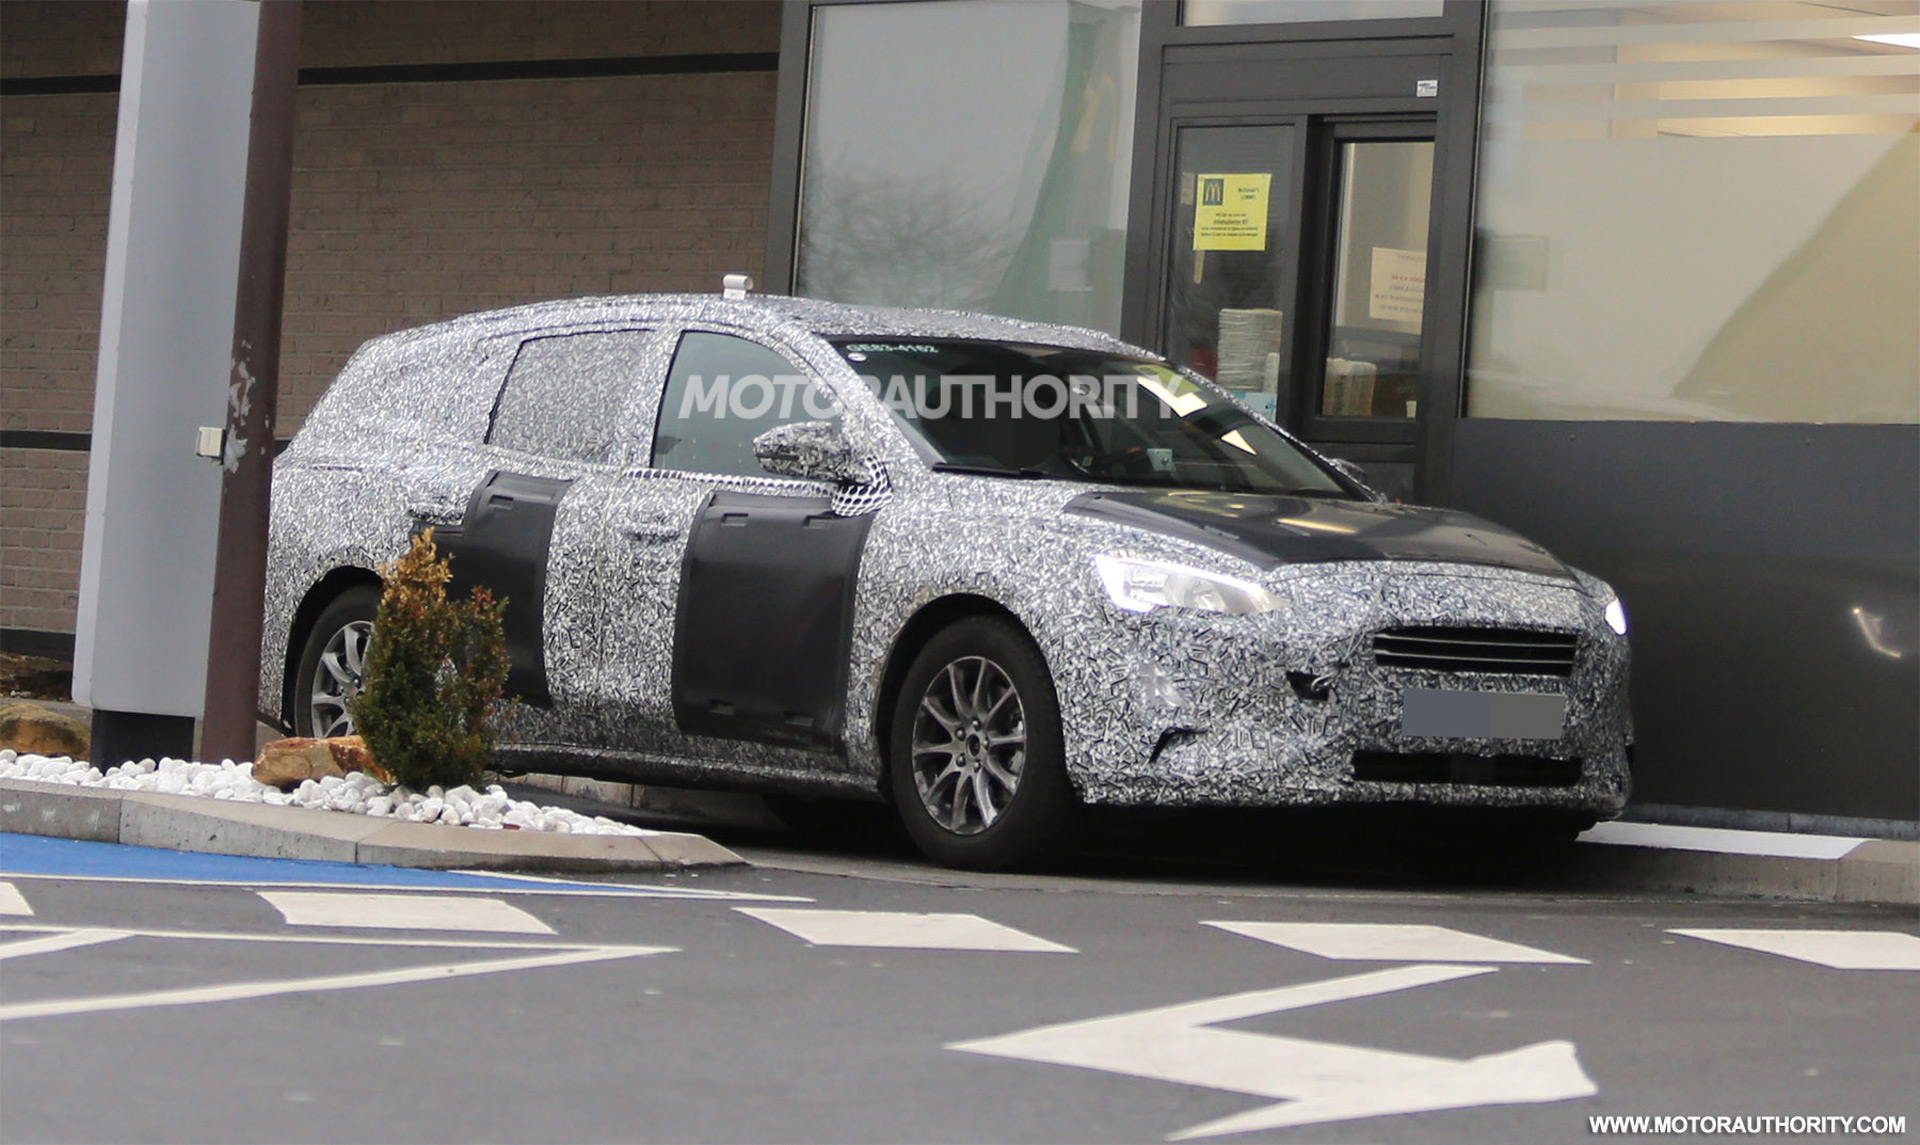 2019 Ford Focus Wagon spy shots and video